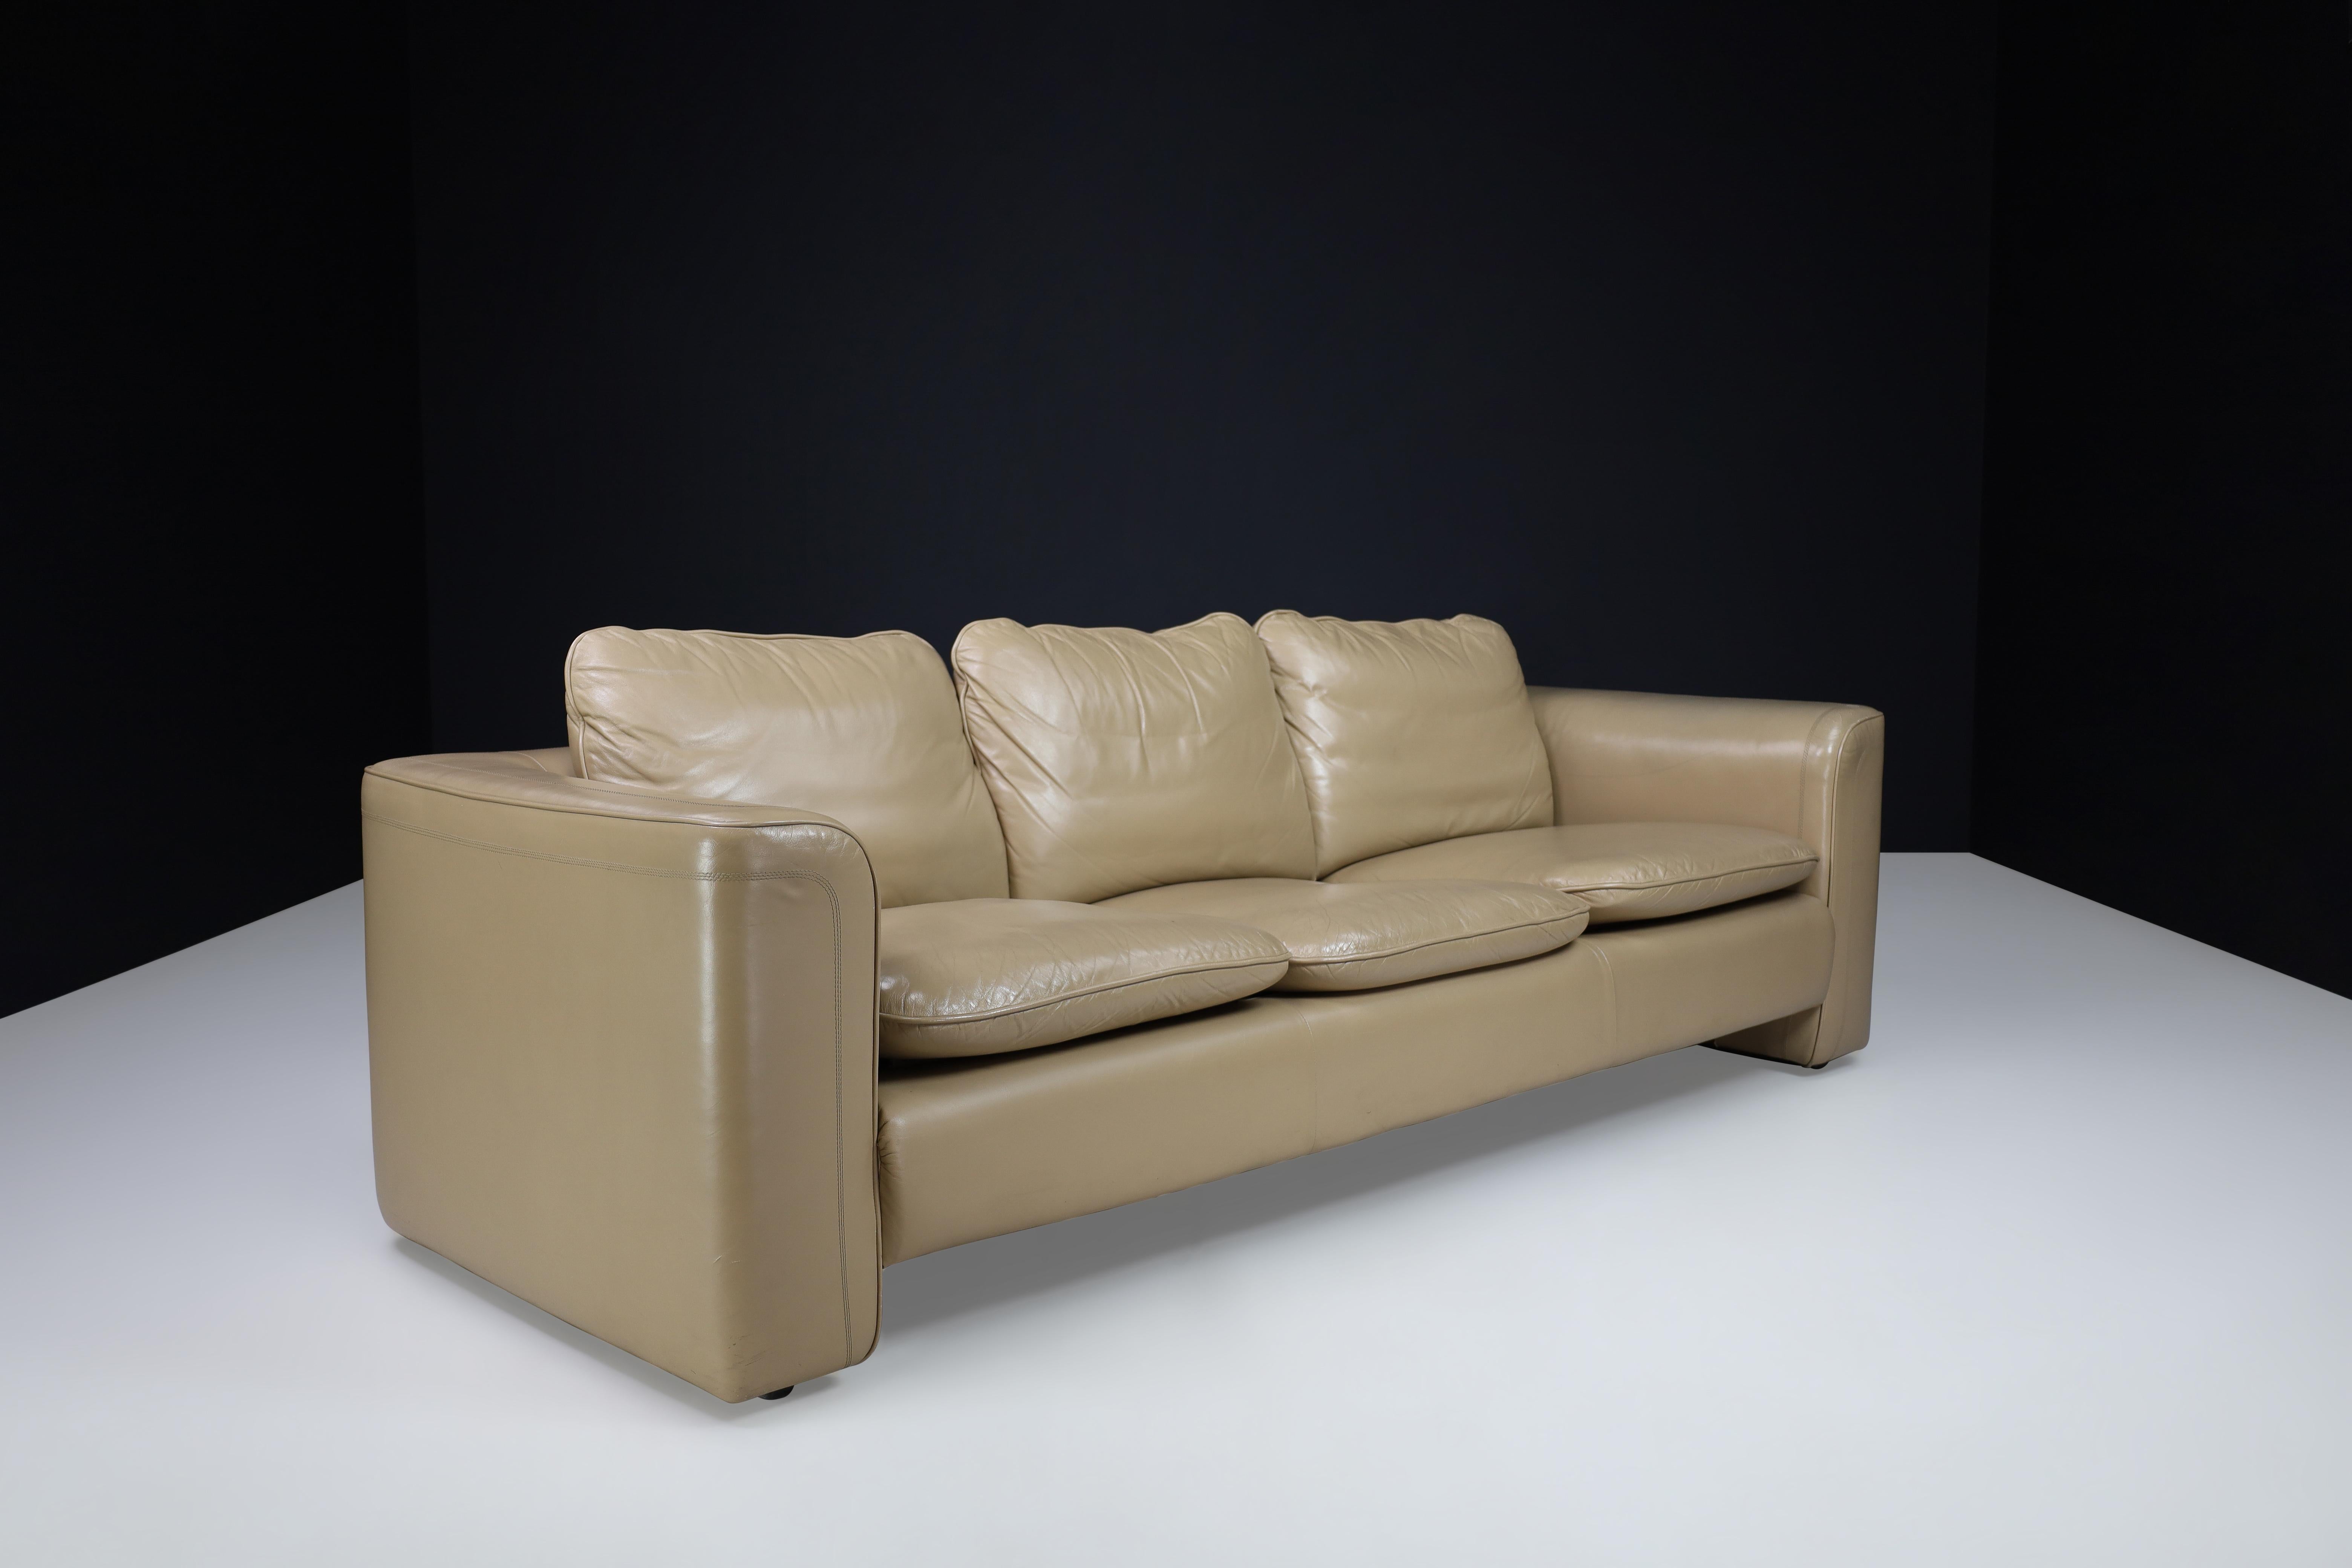 De Sede Ds 98 Leather Three-Seater Sofa, Switzerland, 1980 In Good Condition For Sale In Almelo, NL